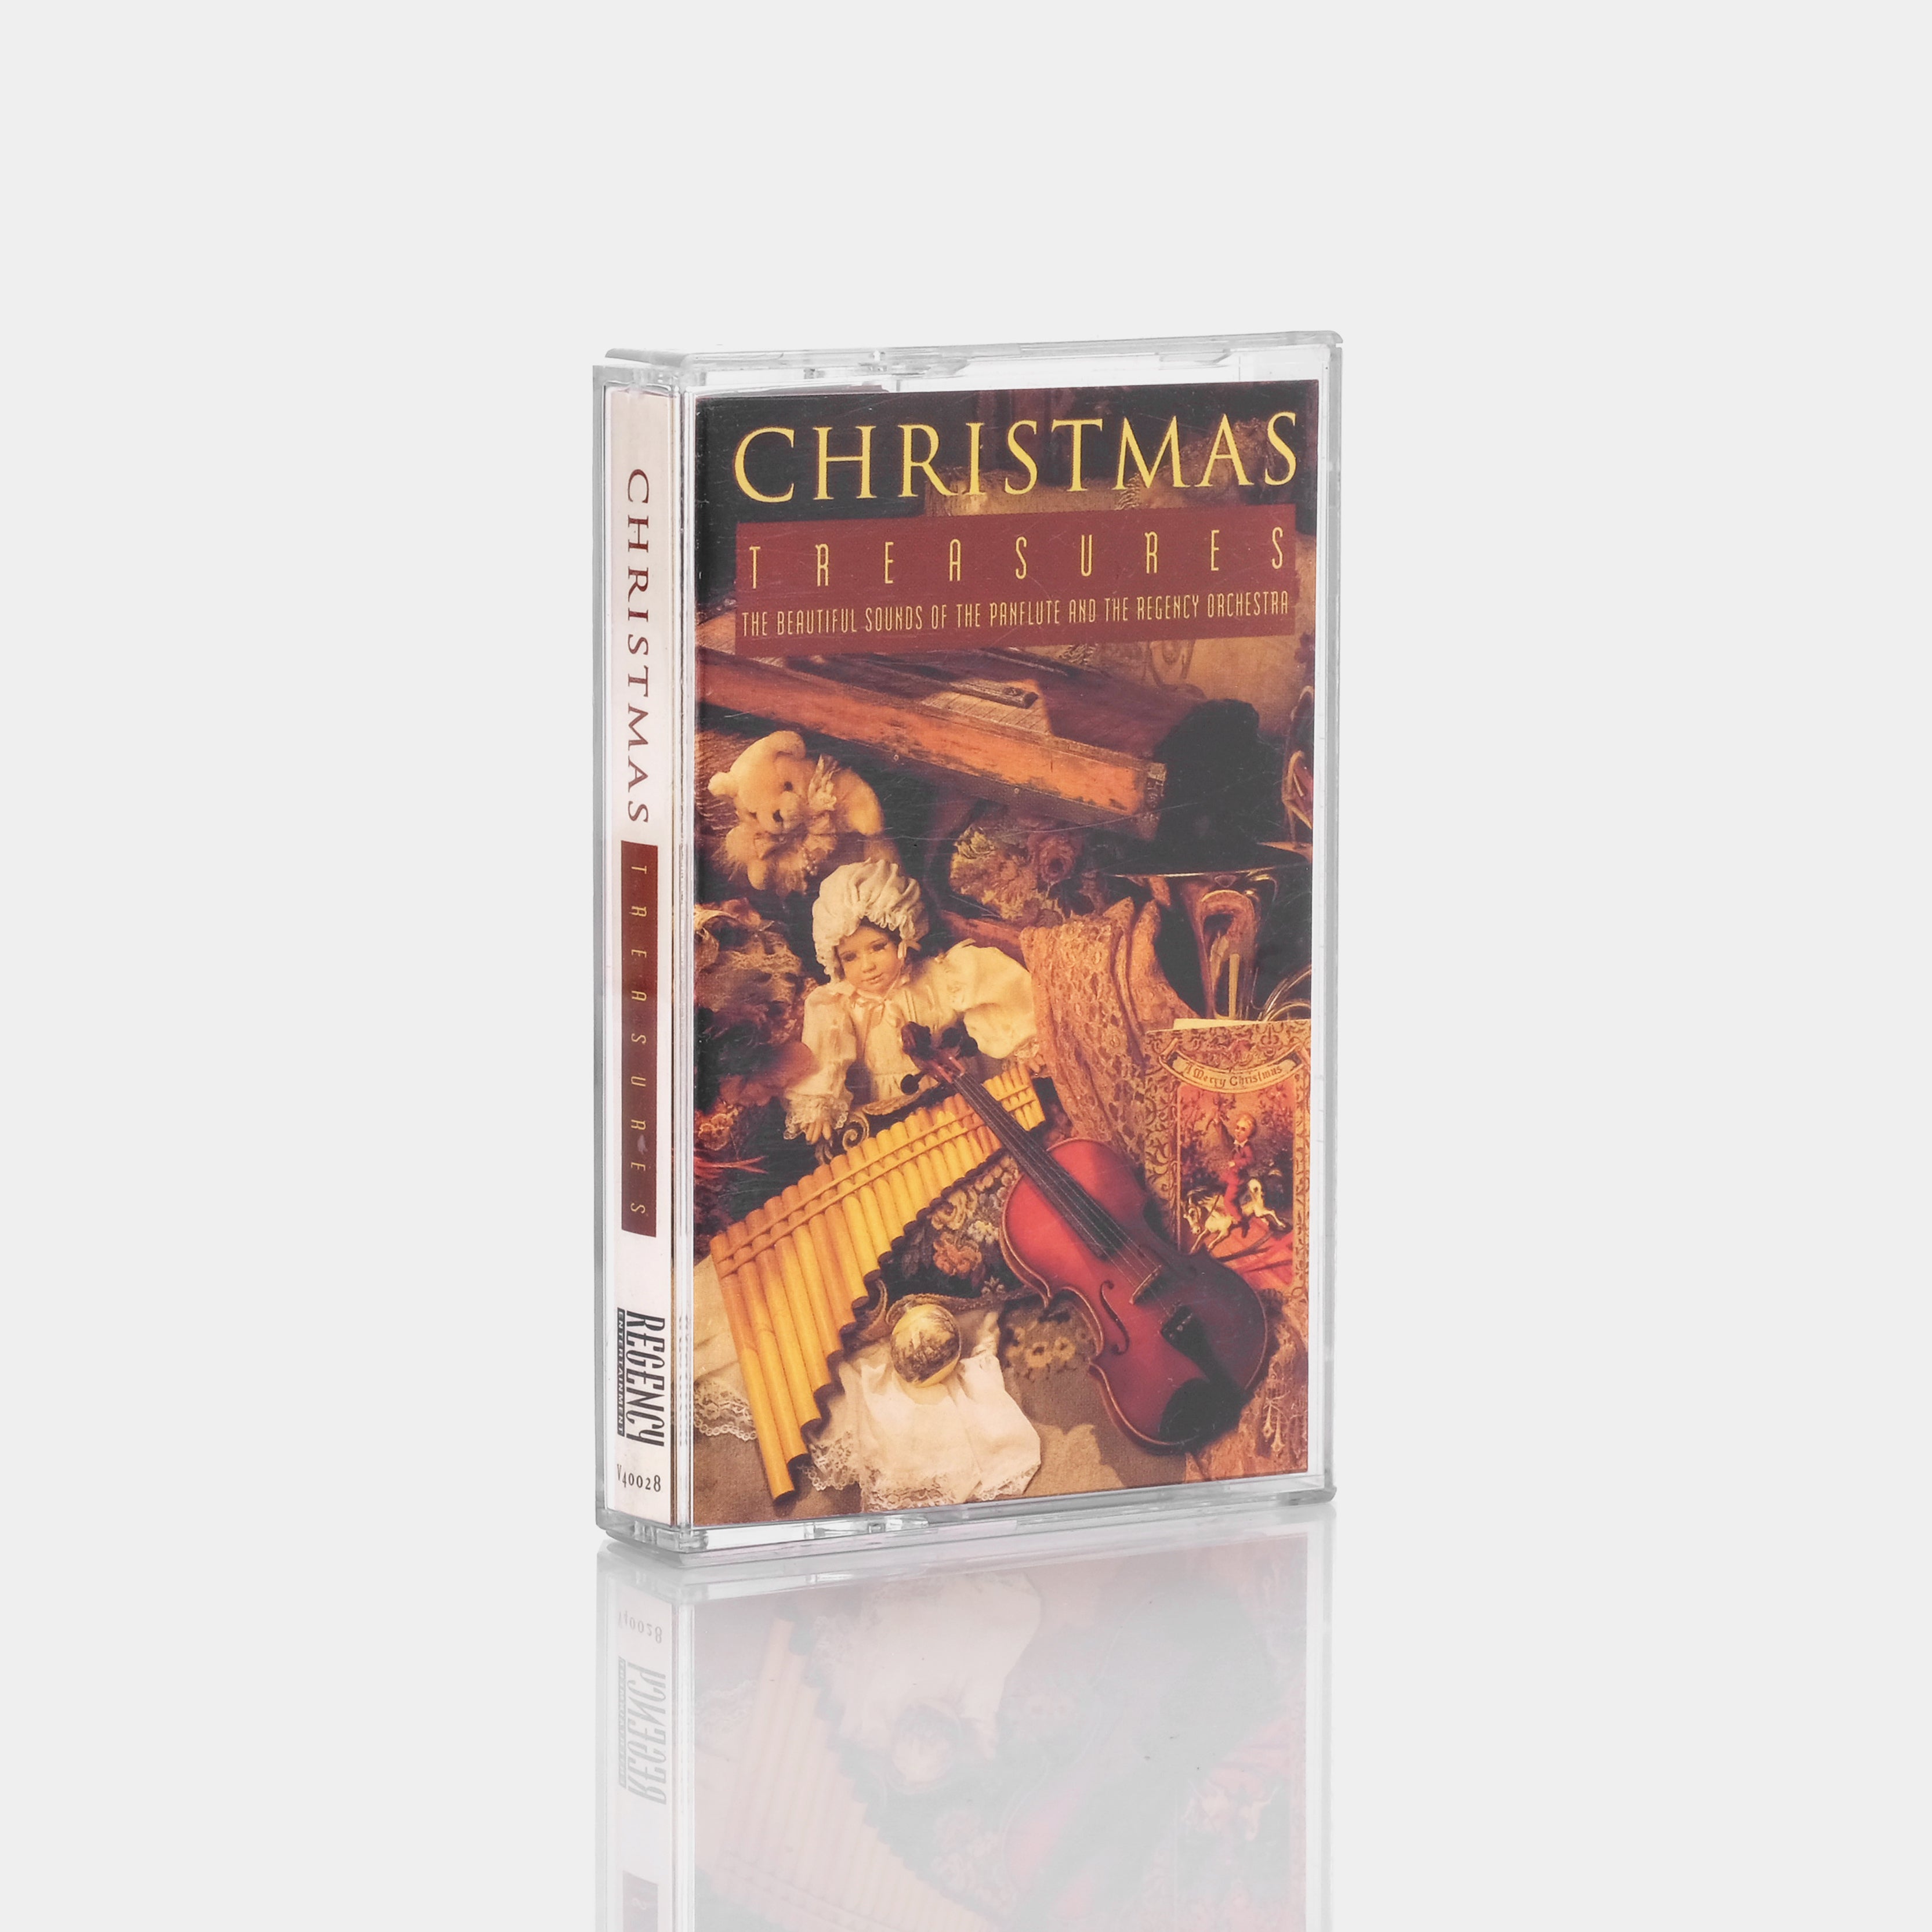 Dan Oxley & The Regency Orchestra - Christmas Treasures: The Beautiful Sounds Of The Panflute And The Regency Orchestra Cassette Tape